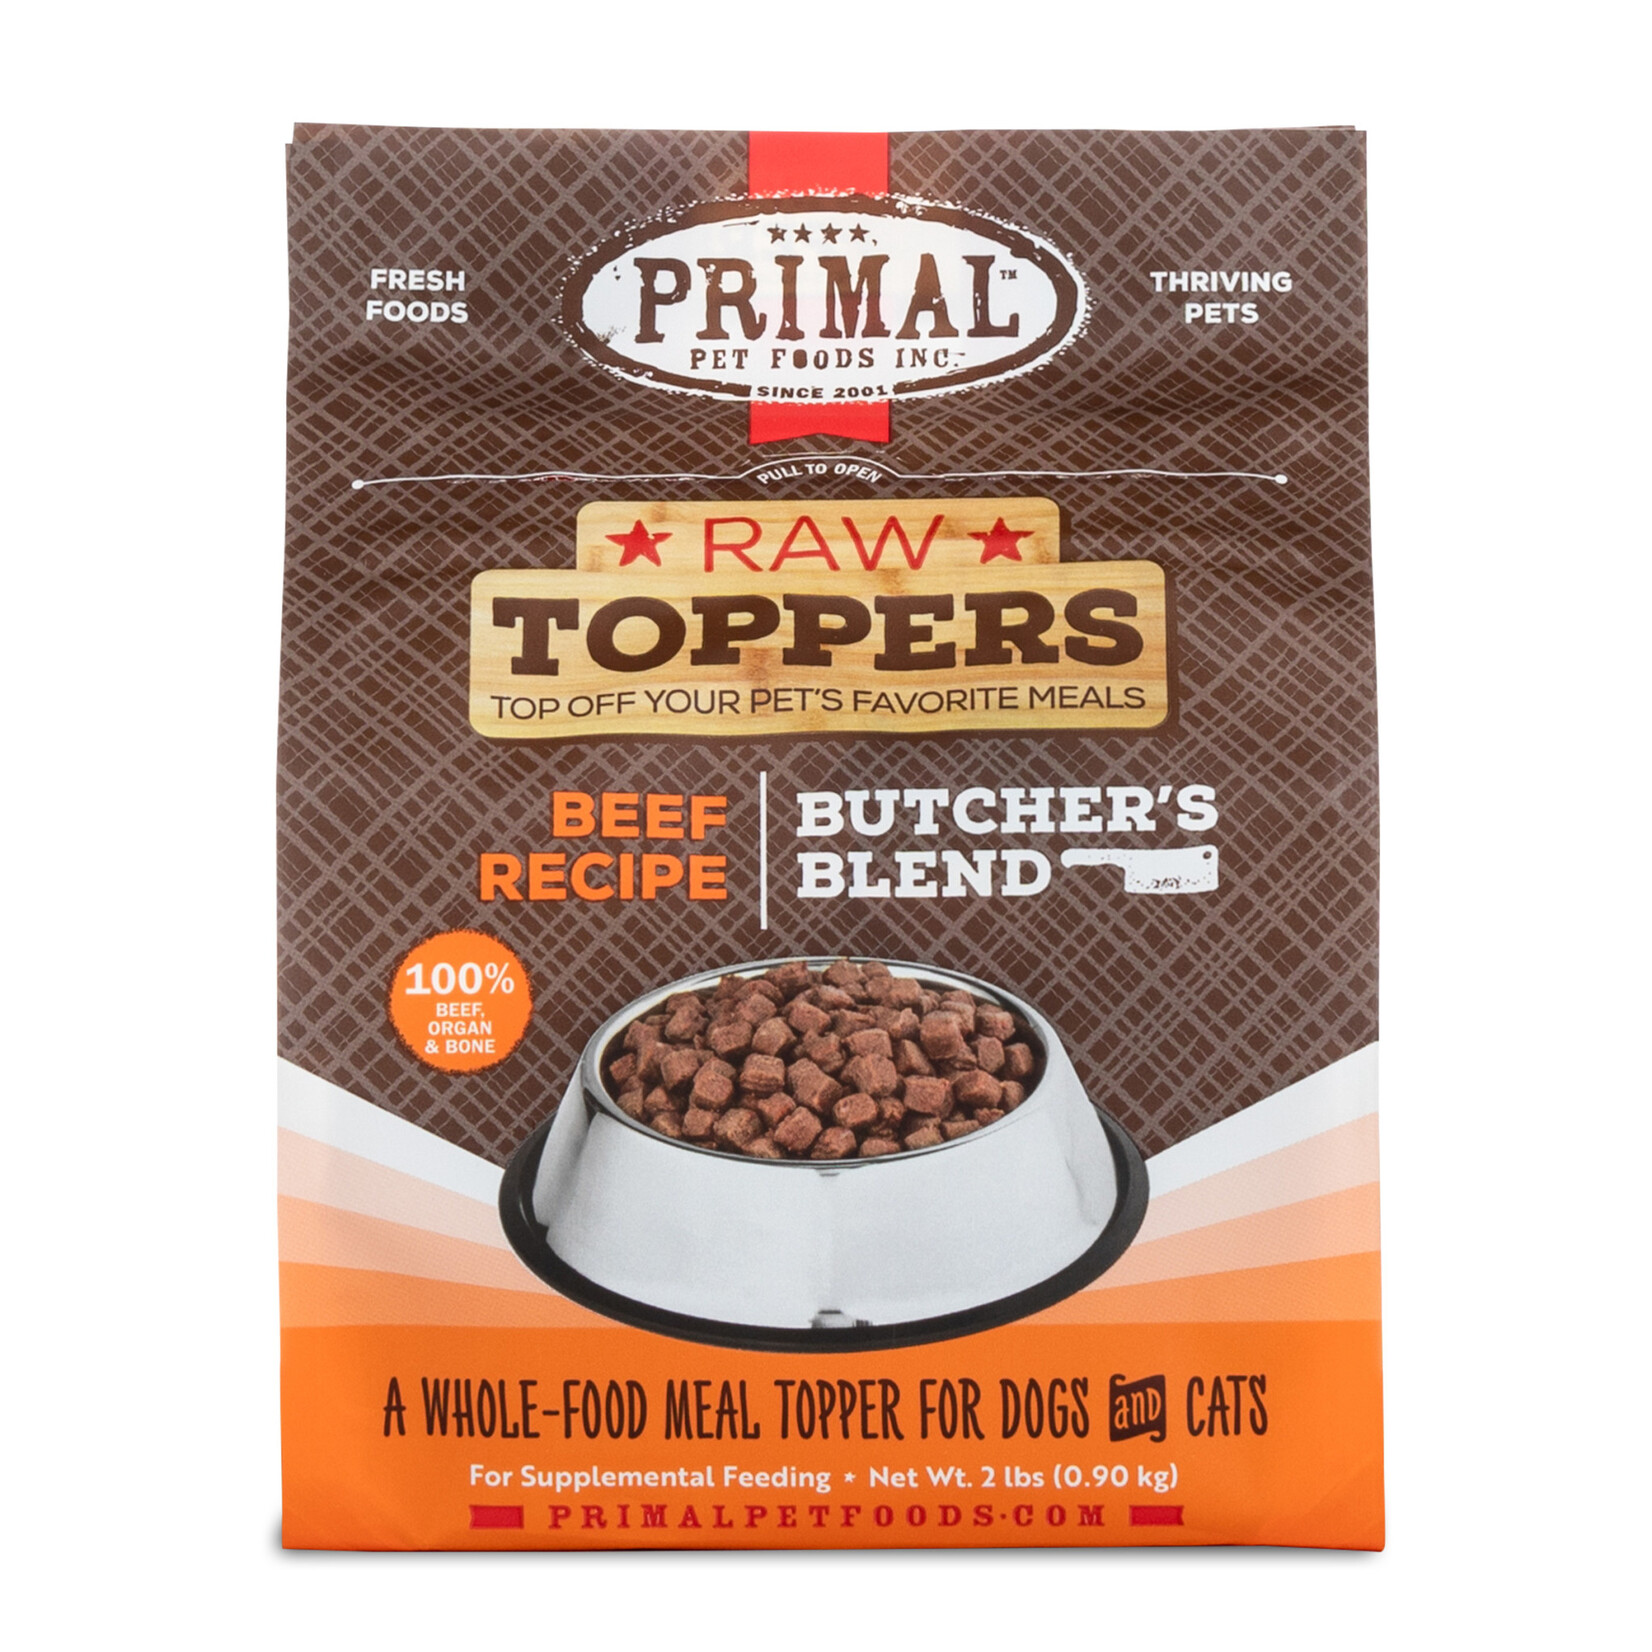 Primal Pet Foods Raw Toppers - Butcher's Blend Beef (*Frozen Products for In-Store Pickup Only. *)